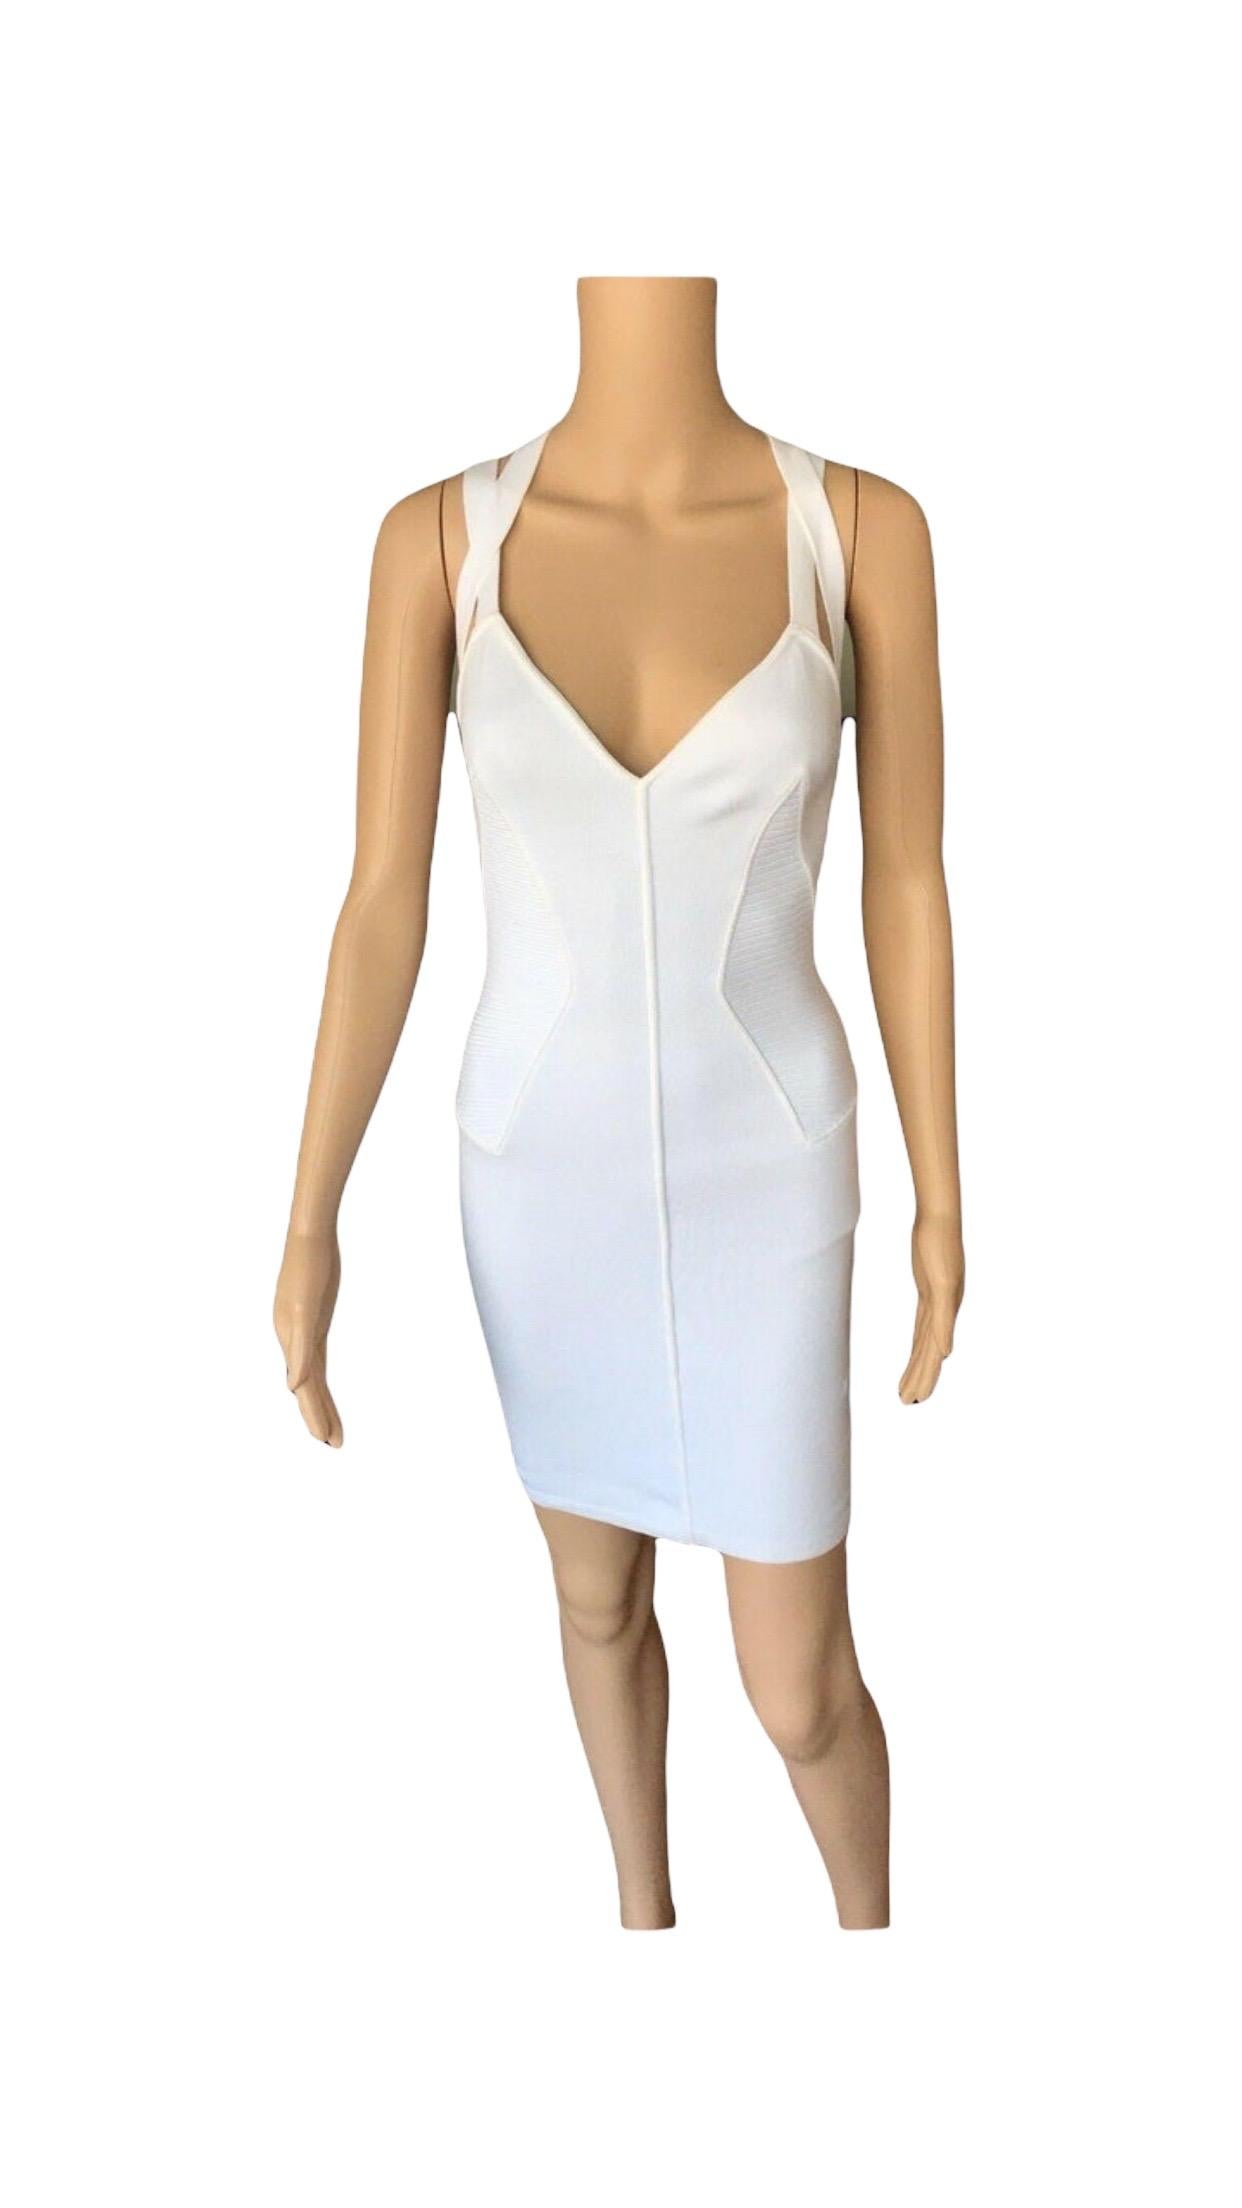 Women's Azzedine Alaia S/S 1990 Vintage Fitted White Dress For Sale